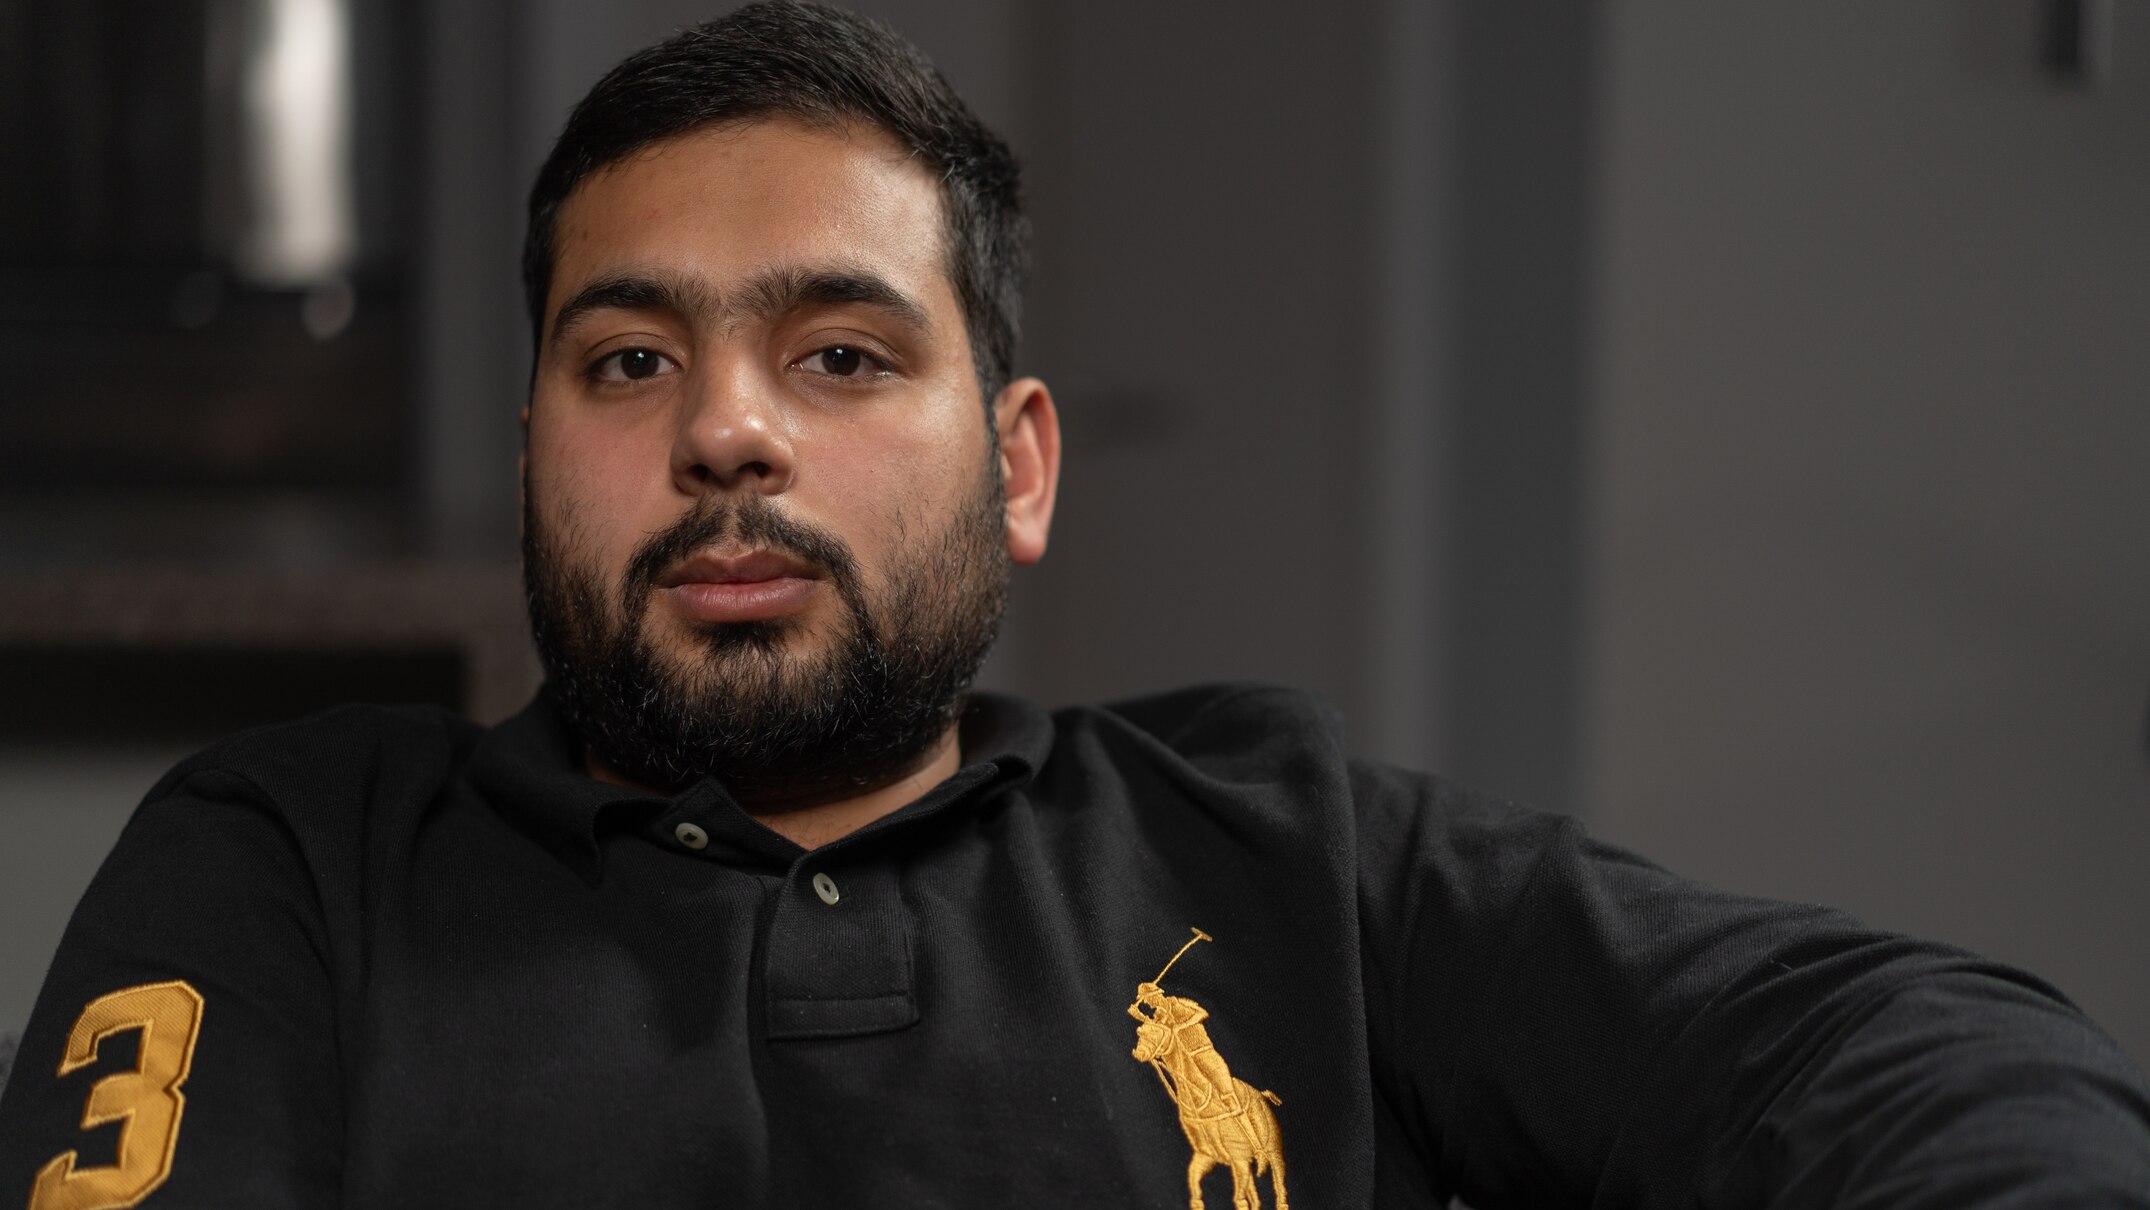 westfield bondi junction security guard muhammad taha on the day that changed his life